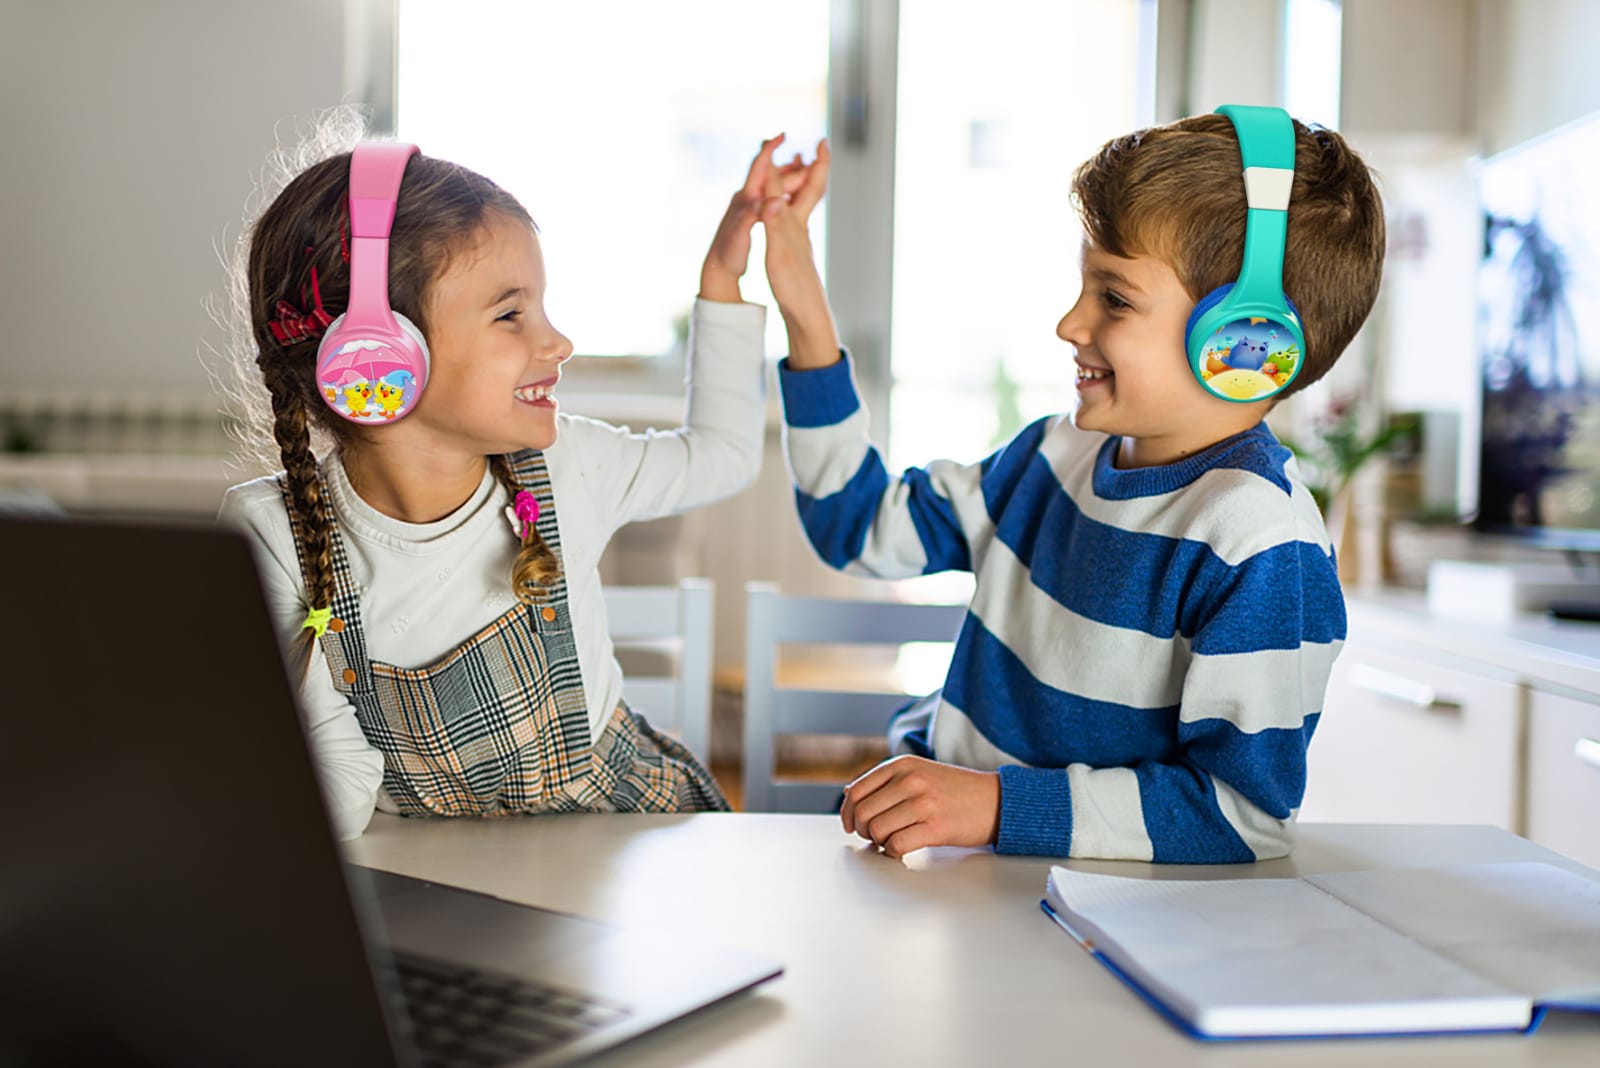 e-PitchPerfect (e-PP) for Kids Bluetooth V5.0 Wireless Headphones, Over Ear Comfortable Earpads, 30 Hours Playtime Designed and Engineered in the USA. Sold 5,000+ worldwide